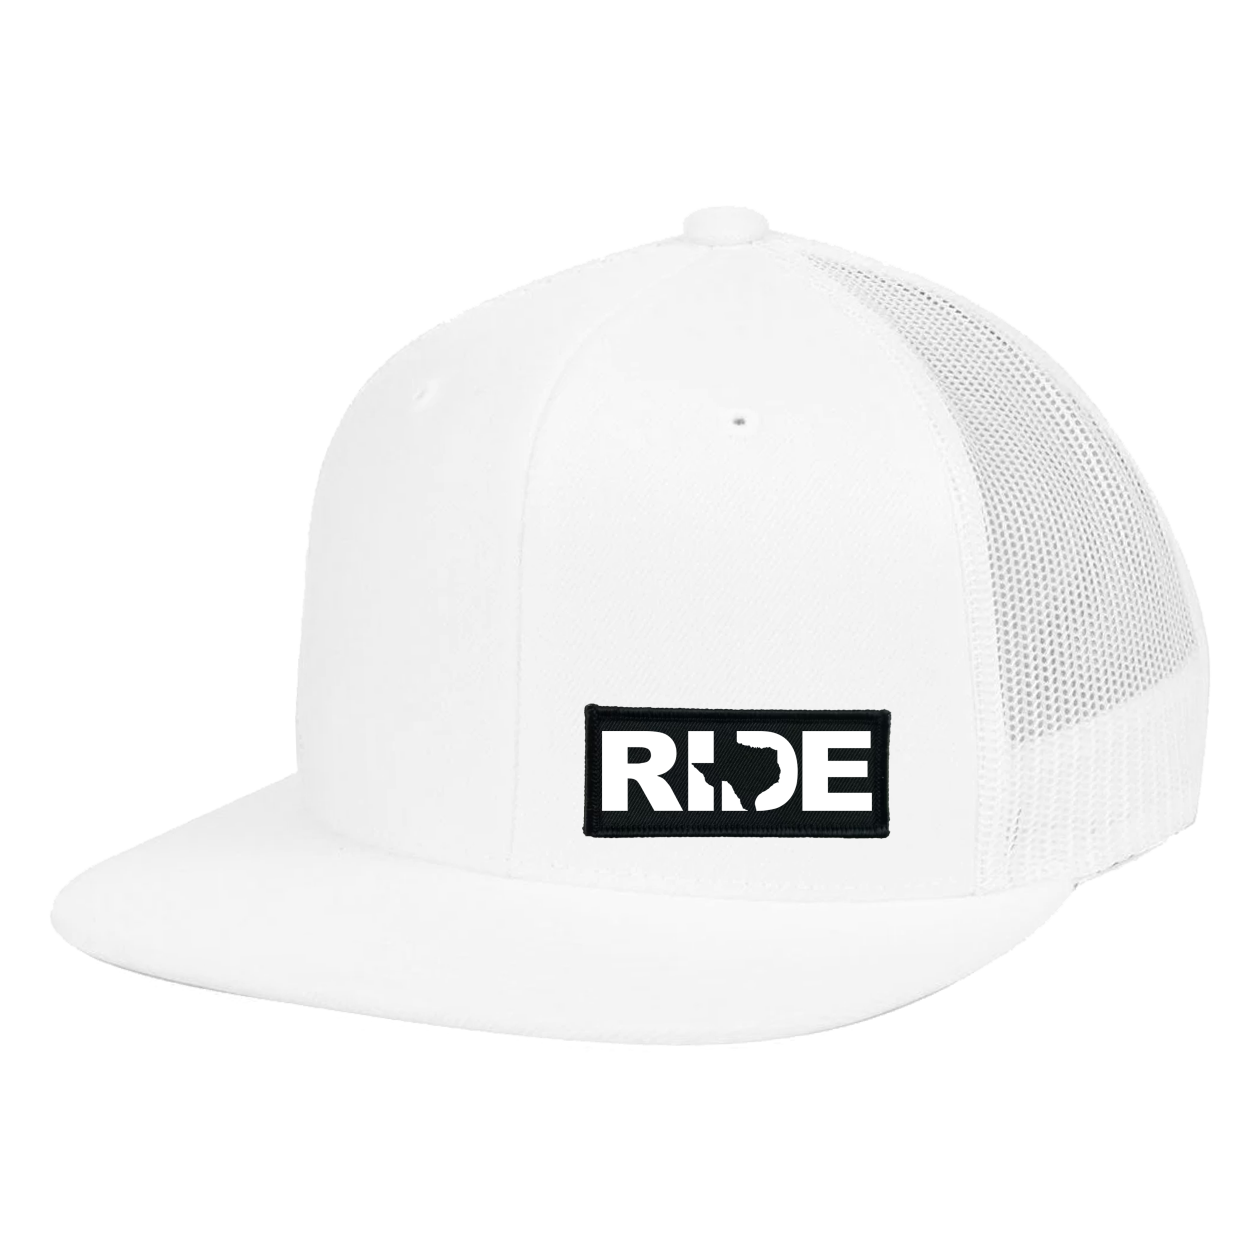 Ride Texas Night Out Woven Patch Flat Brim Trucker Snapback Hat White